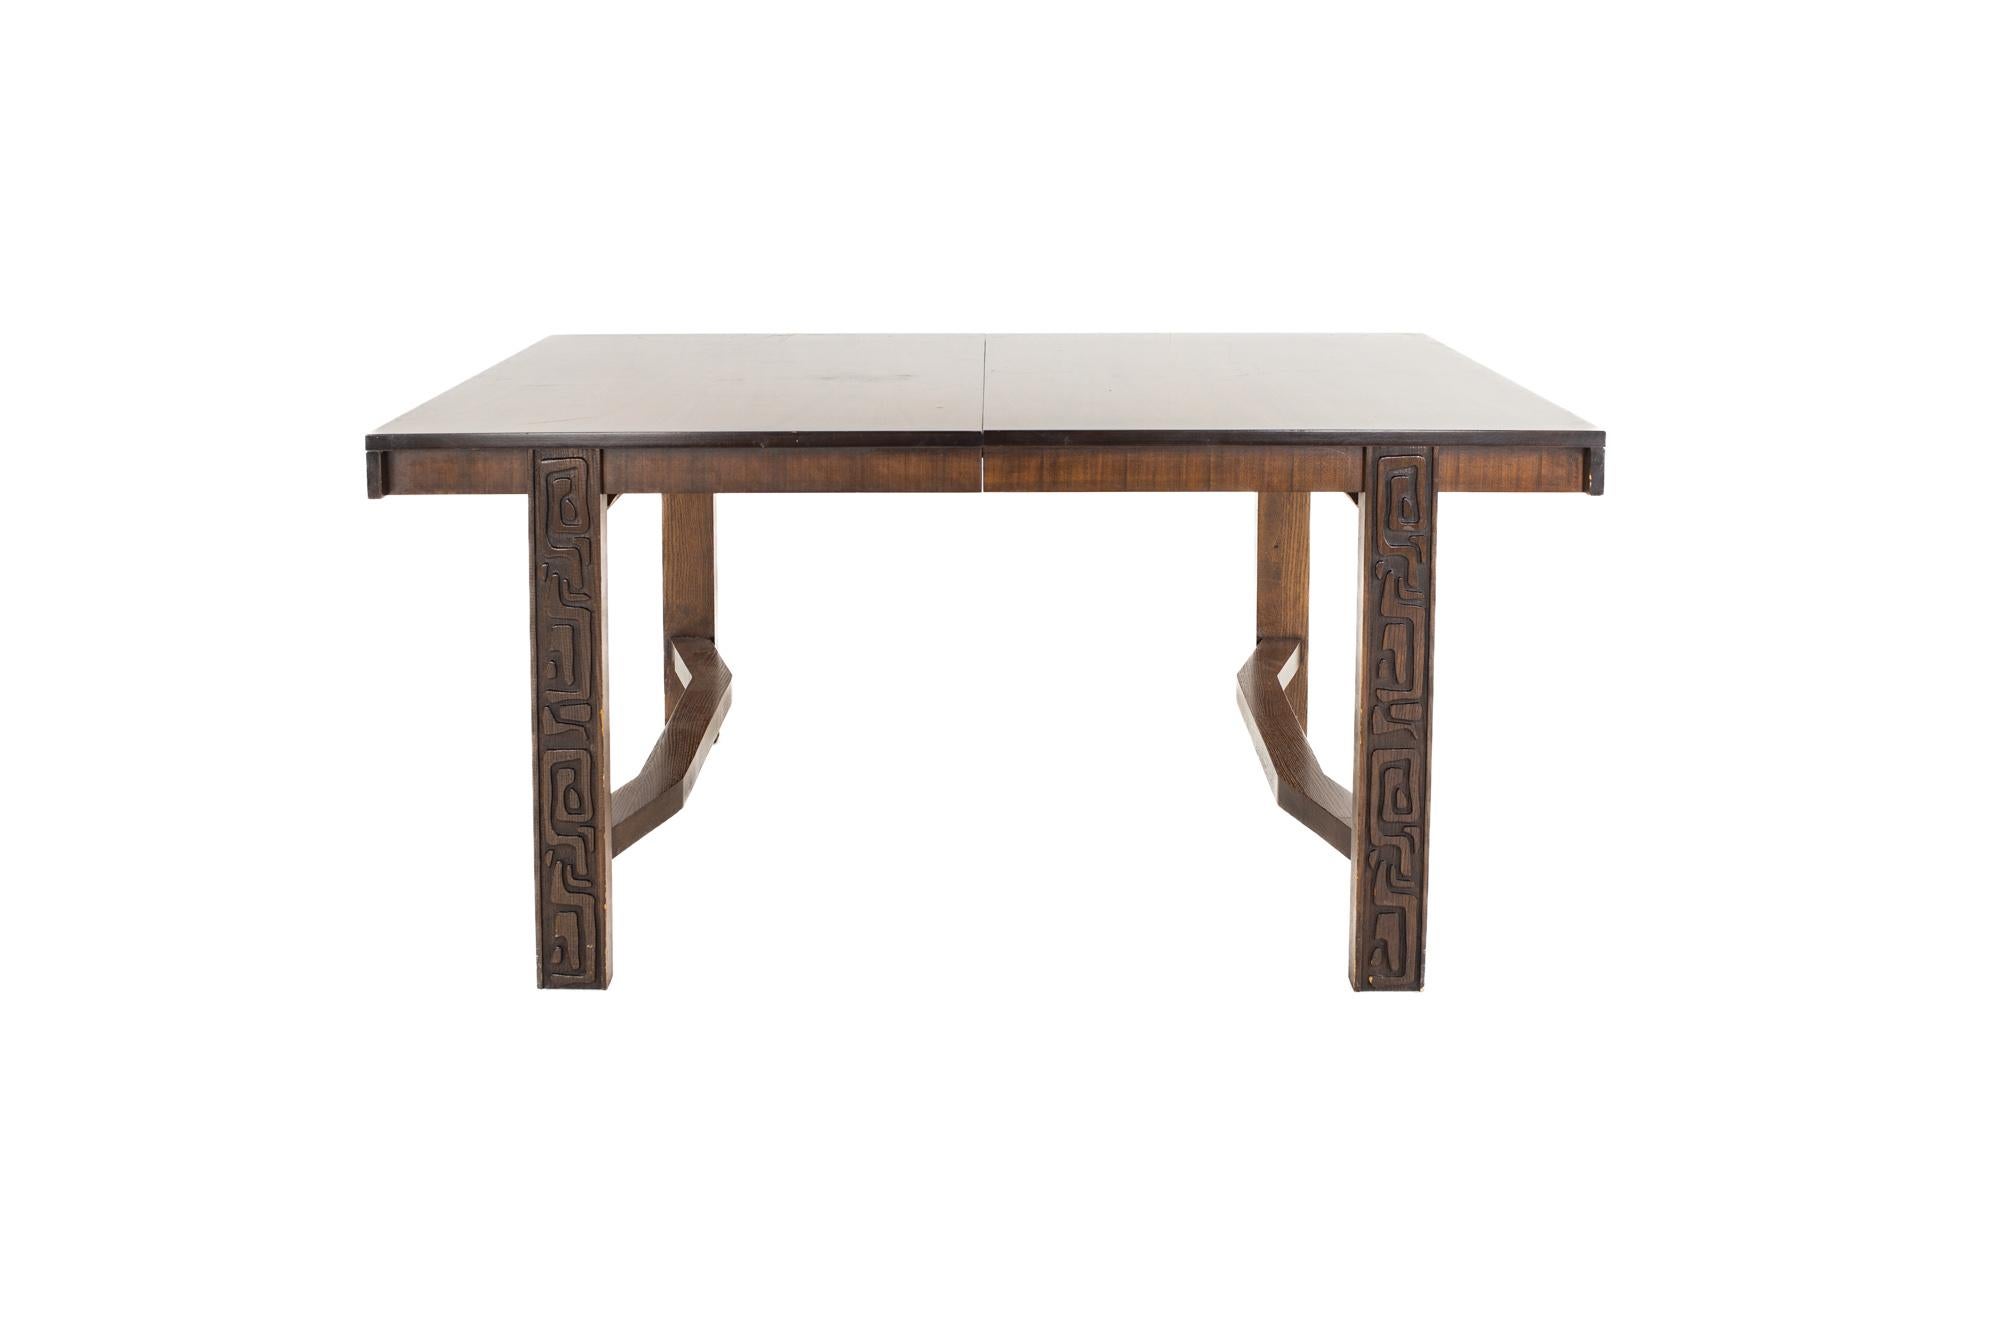 United Furniture mid century walnut Tiki Brutalist dining table

The table measures: 62 wide x 42 deep x 30 high, with a chair clearance of 26.25 inches; each leaf is 18 inches wide, making a maximum table width of 98 inches when both leaves are